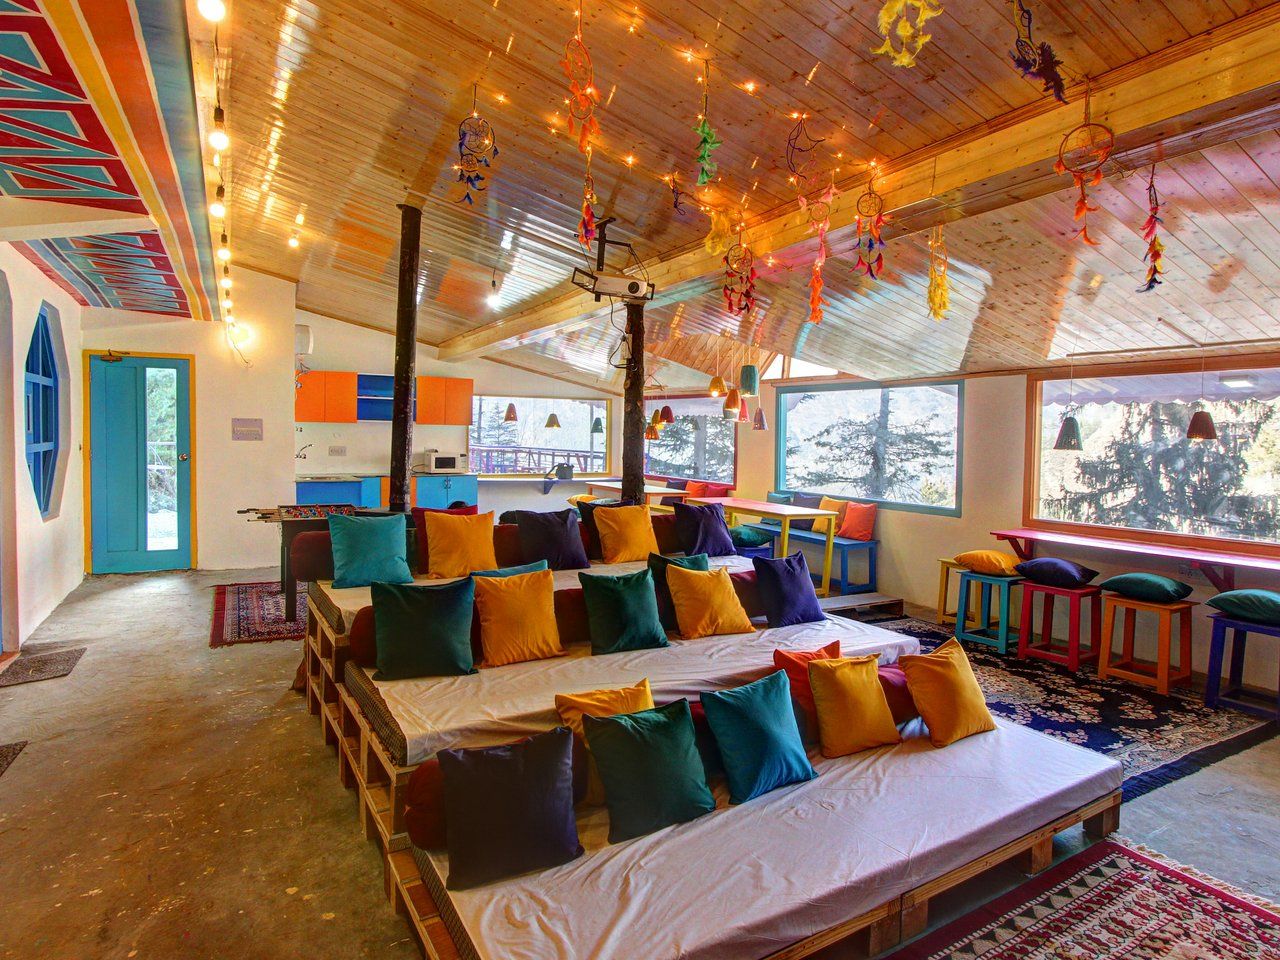 Plan a Trip to These 5 Offbeat Budget-Friendly Retreats in India to Break That Covid Monotony